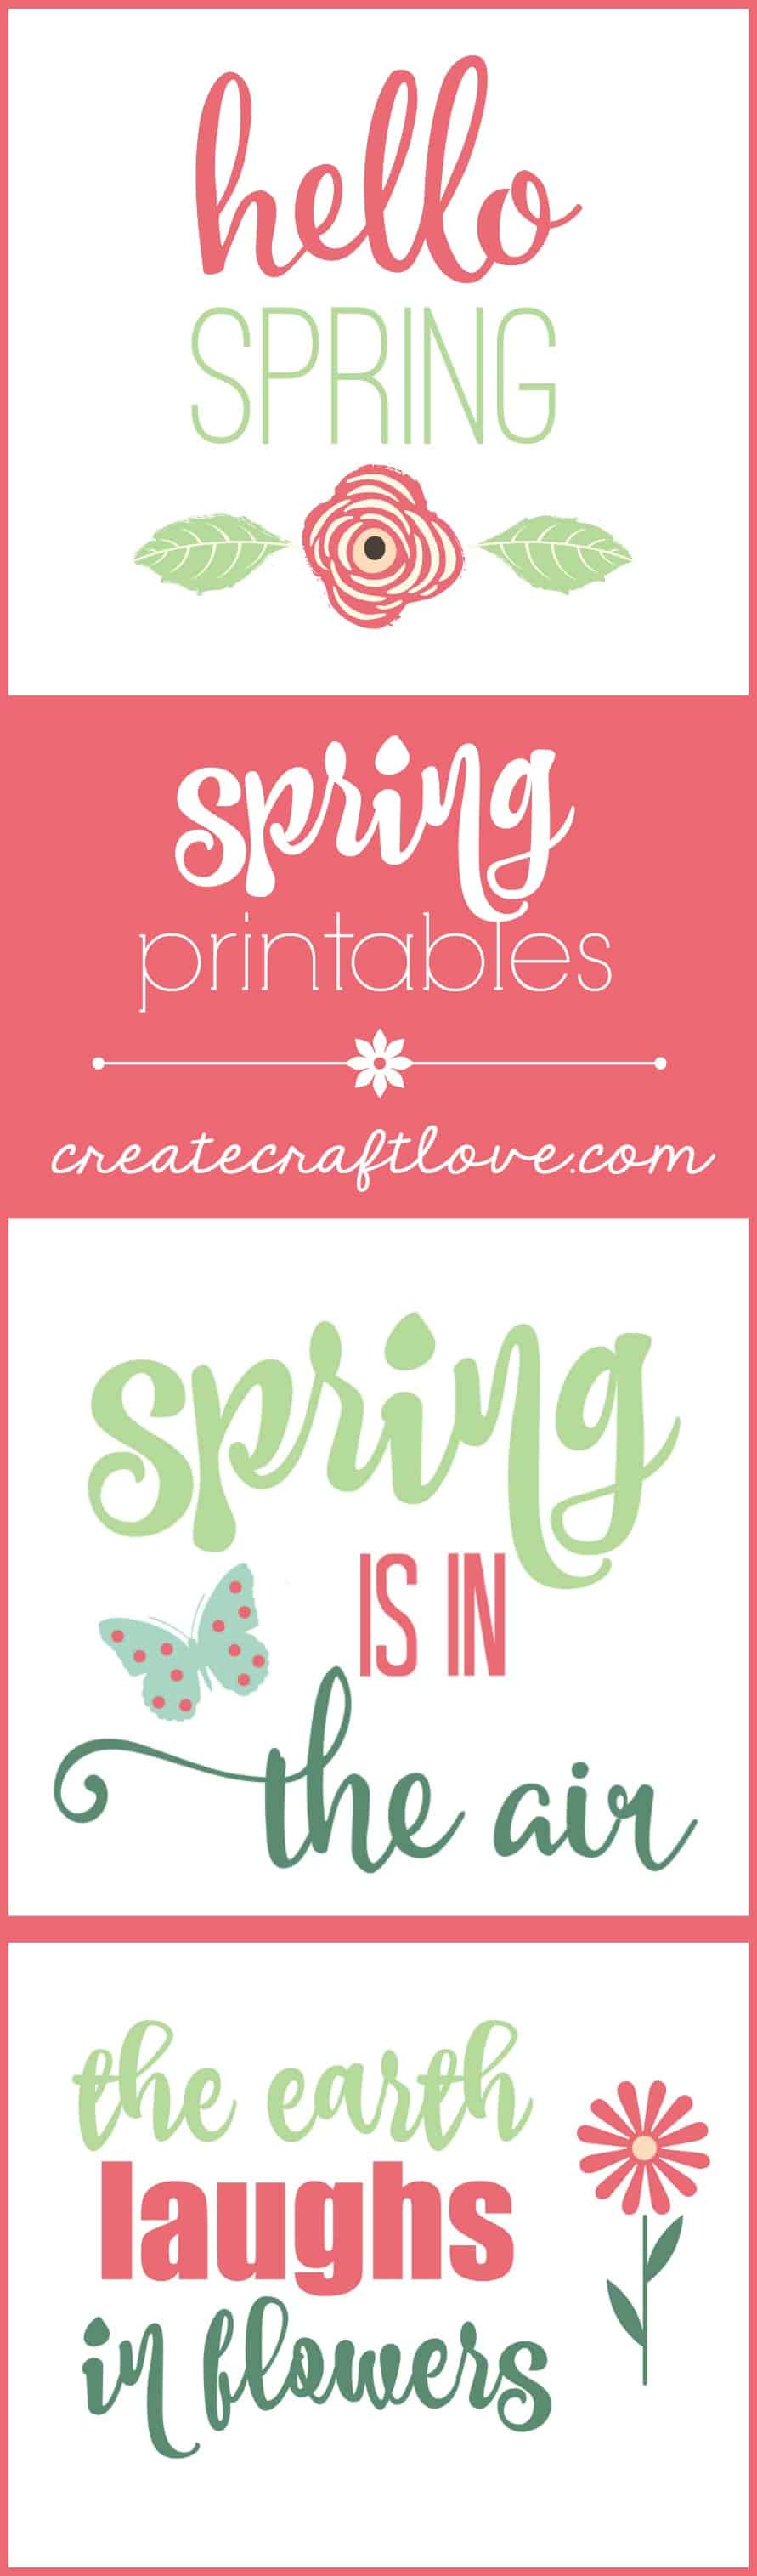 For those of you who do not sew but like the patterns, I created these fun Spring Art Printables!